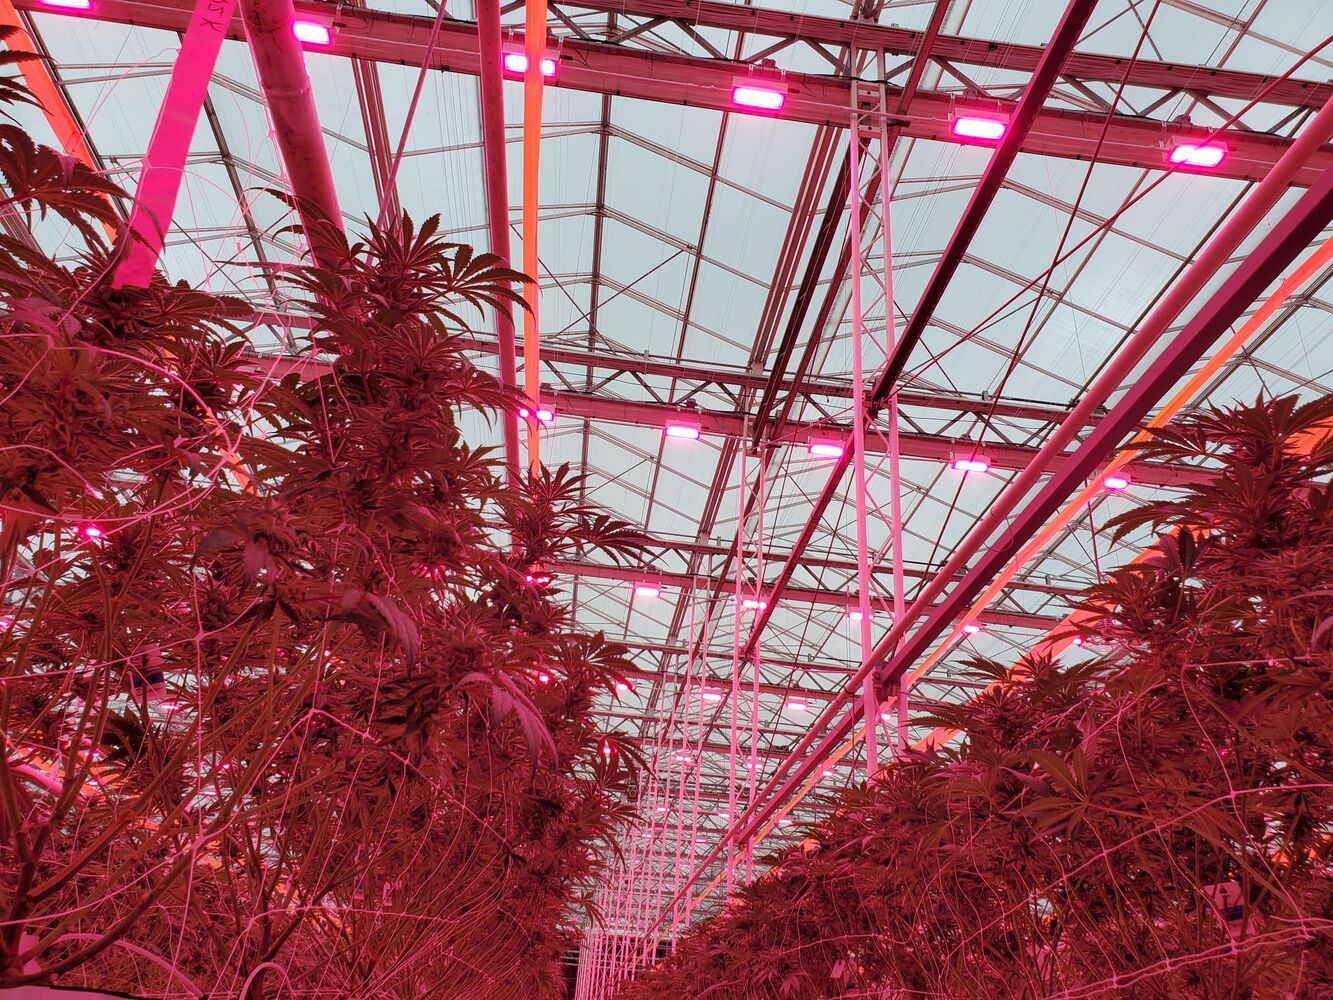 Organic Remedies installs full LED in phase 2